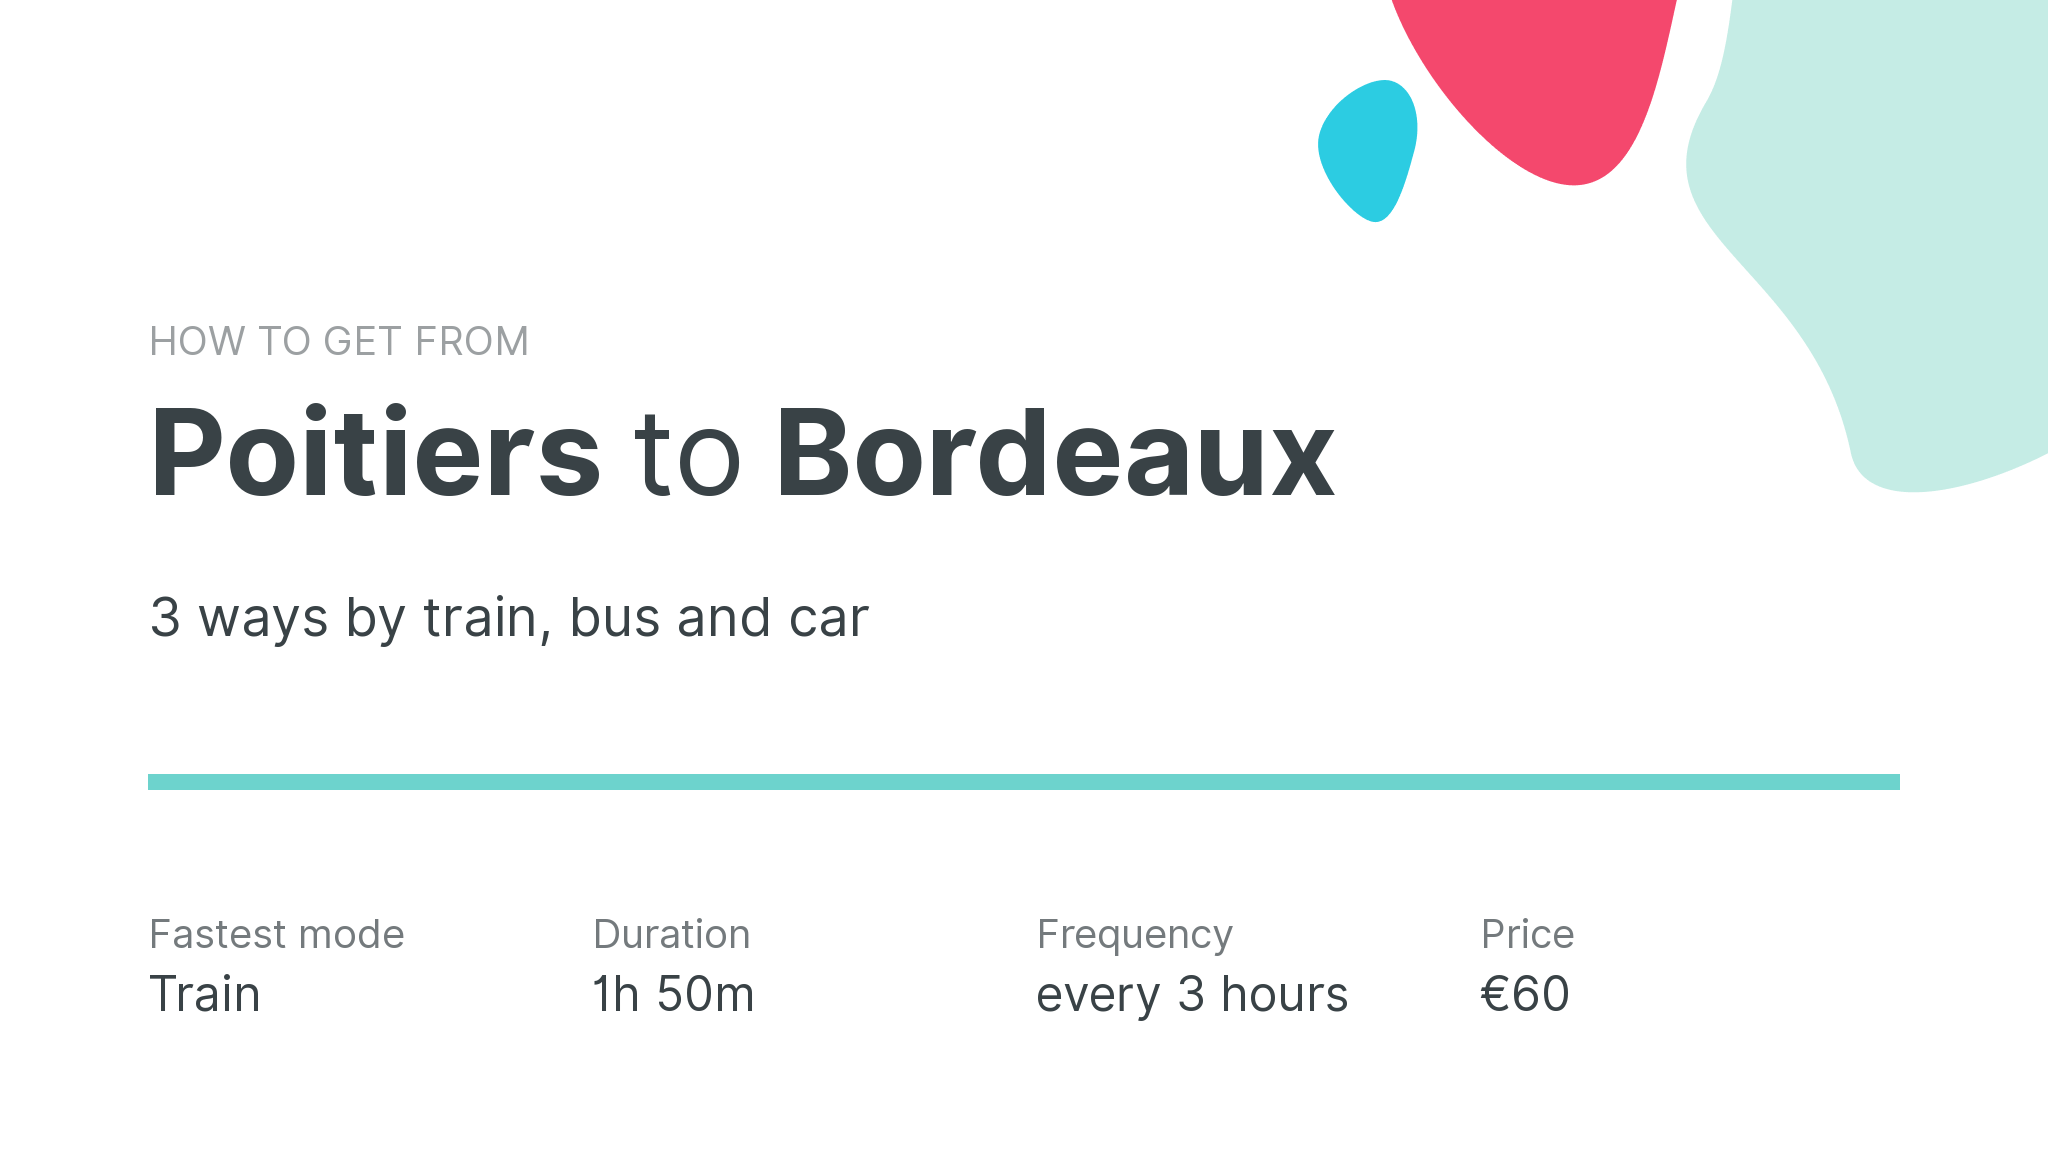 How do I get from Poitiers to Bordeaux